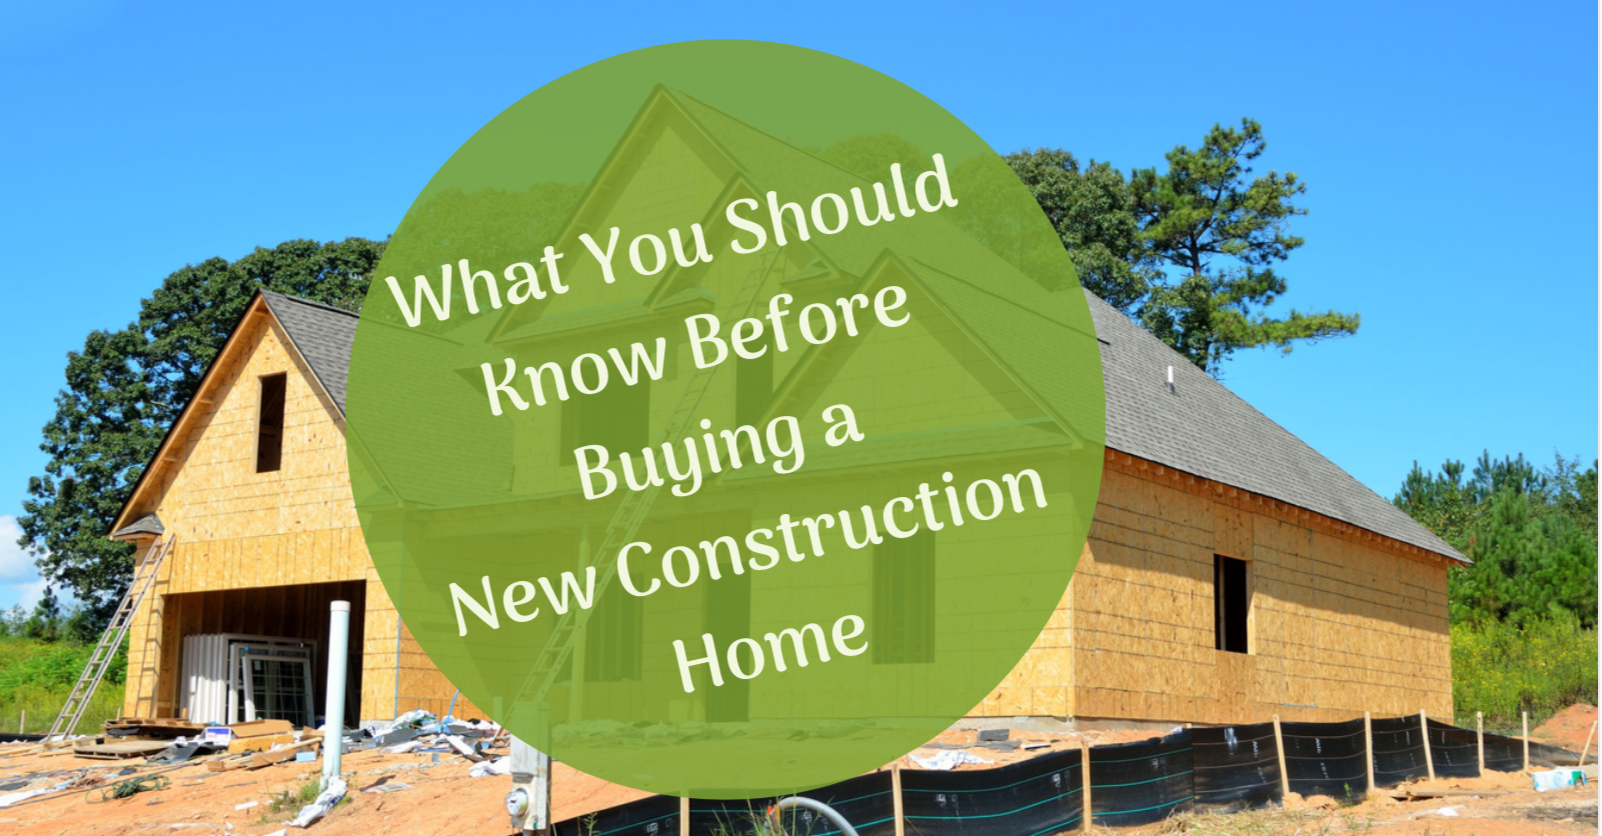 What You Should Know Before Buying a New Construction Home